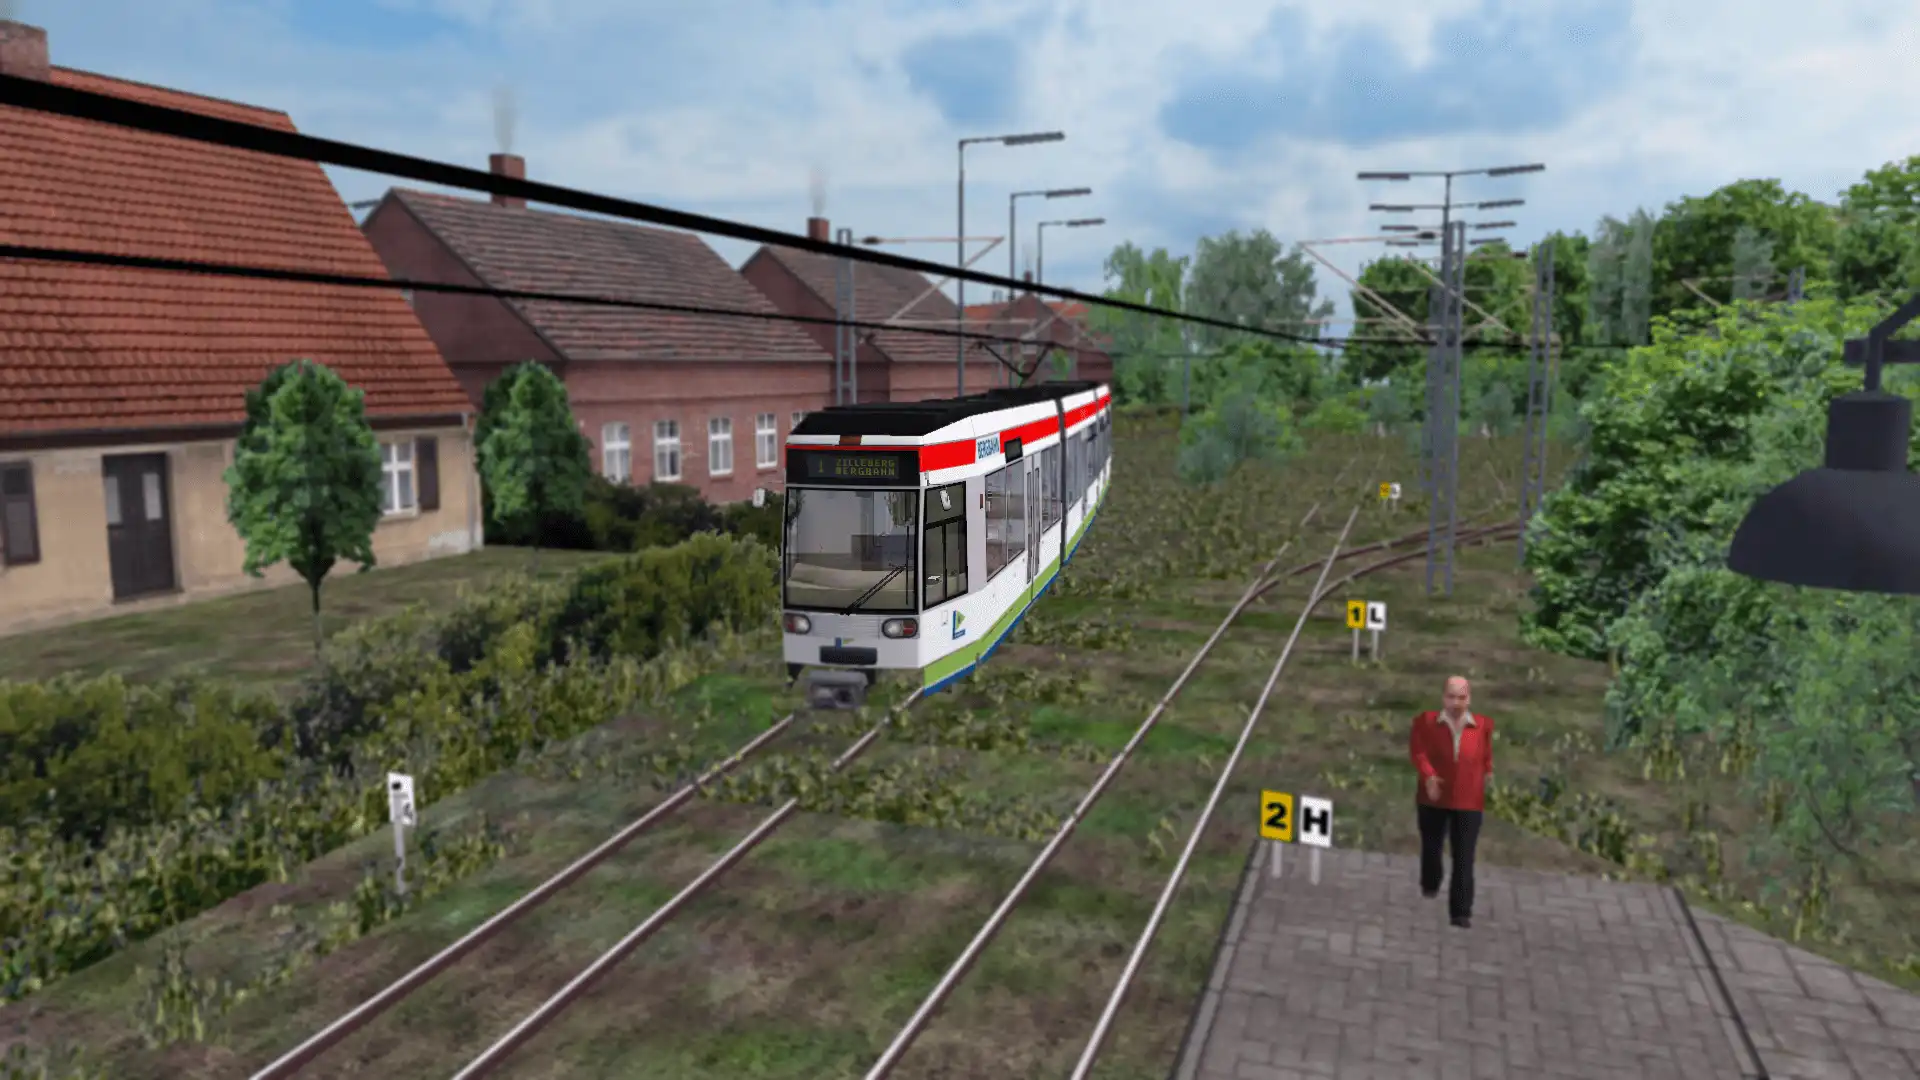 Download web tool or web app OMSI 2 Add-on K-Bergbahn to run in Windows online over Linux online